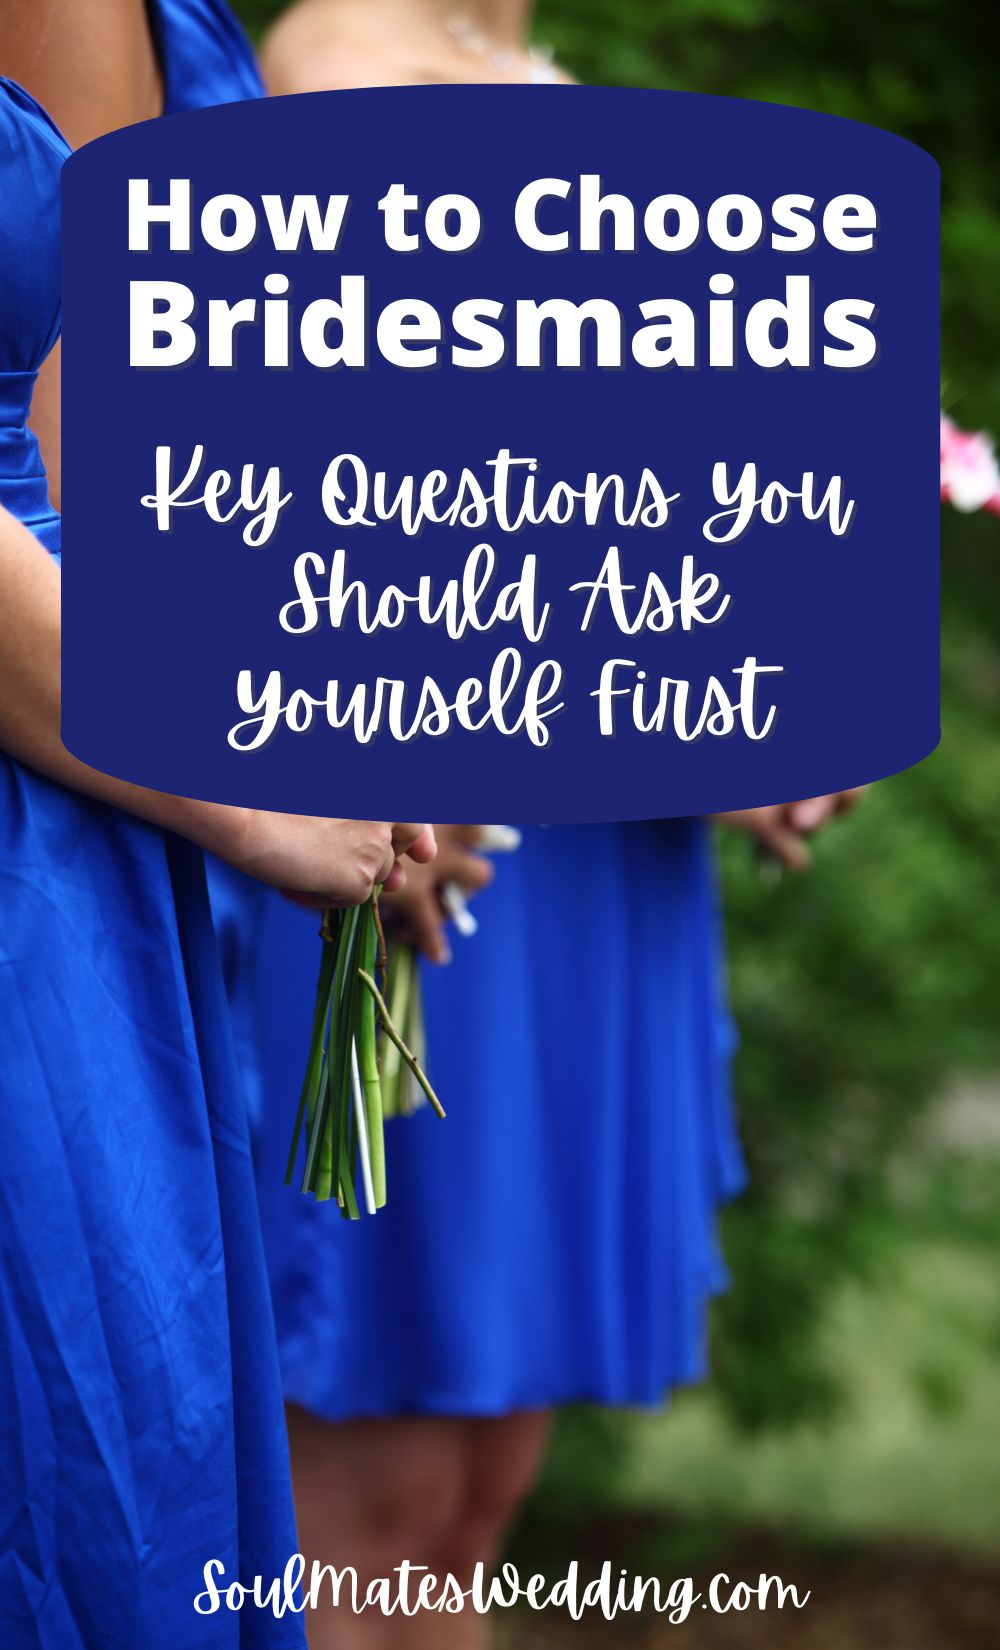 How to Choose Bridesmaids